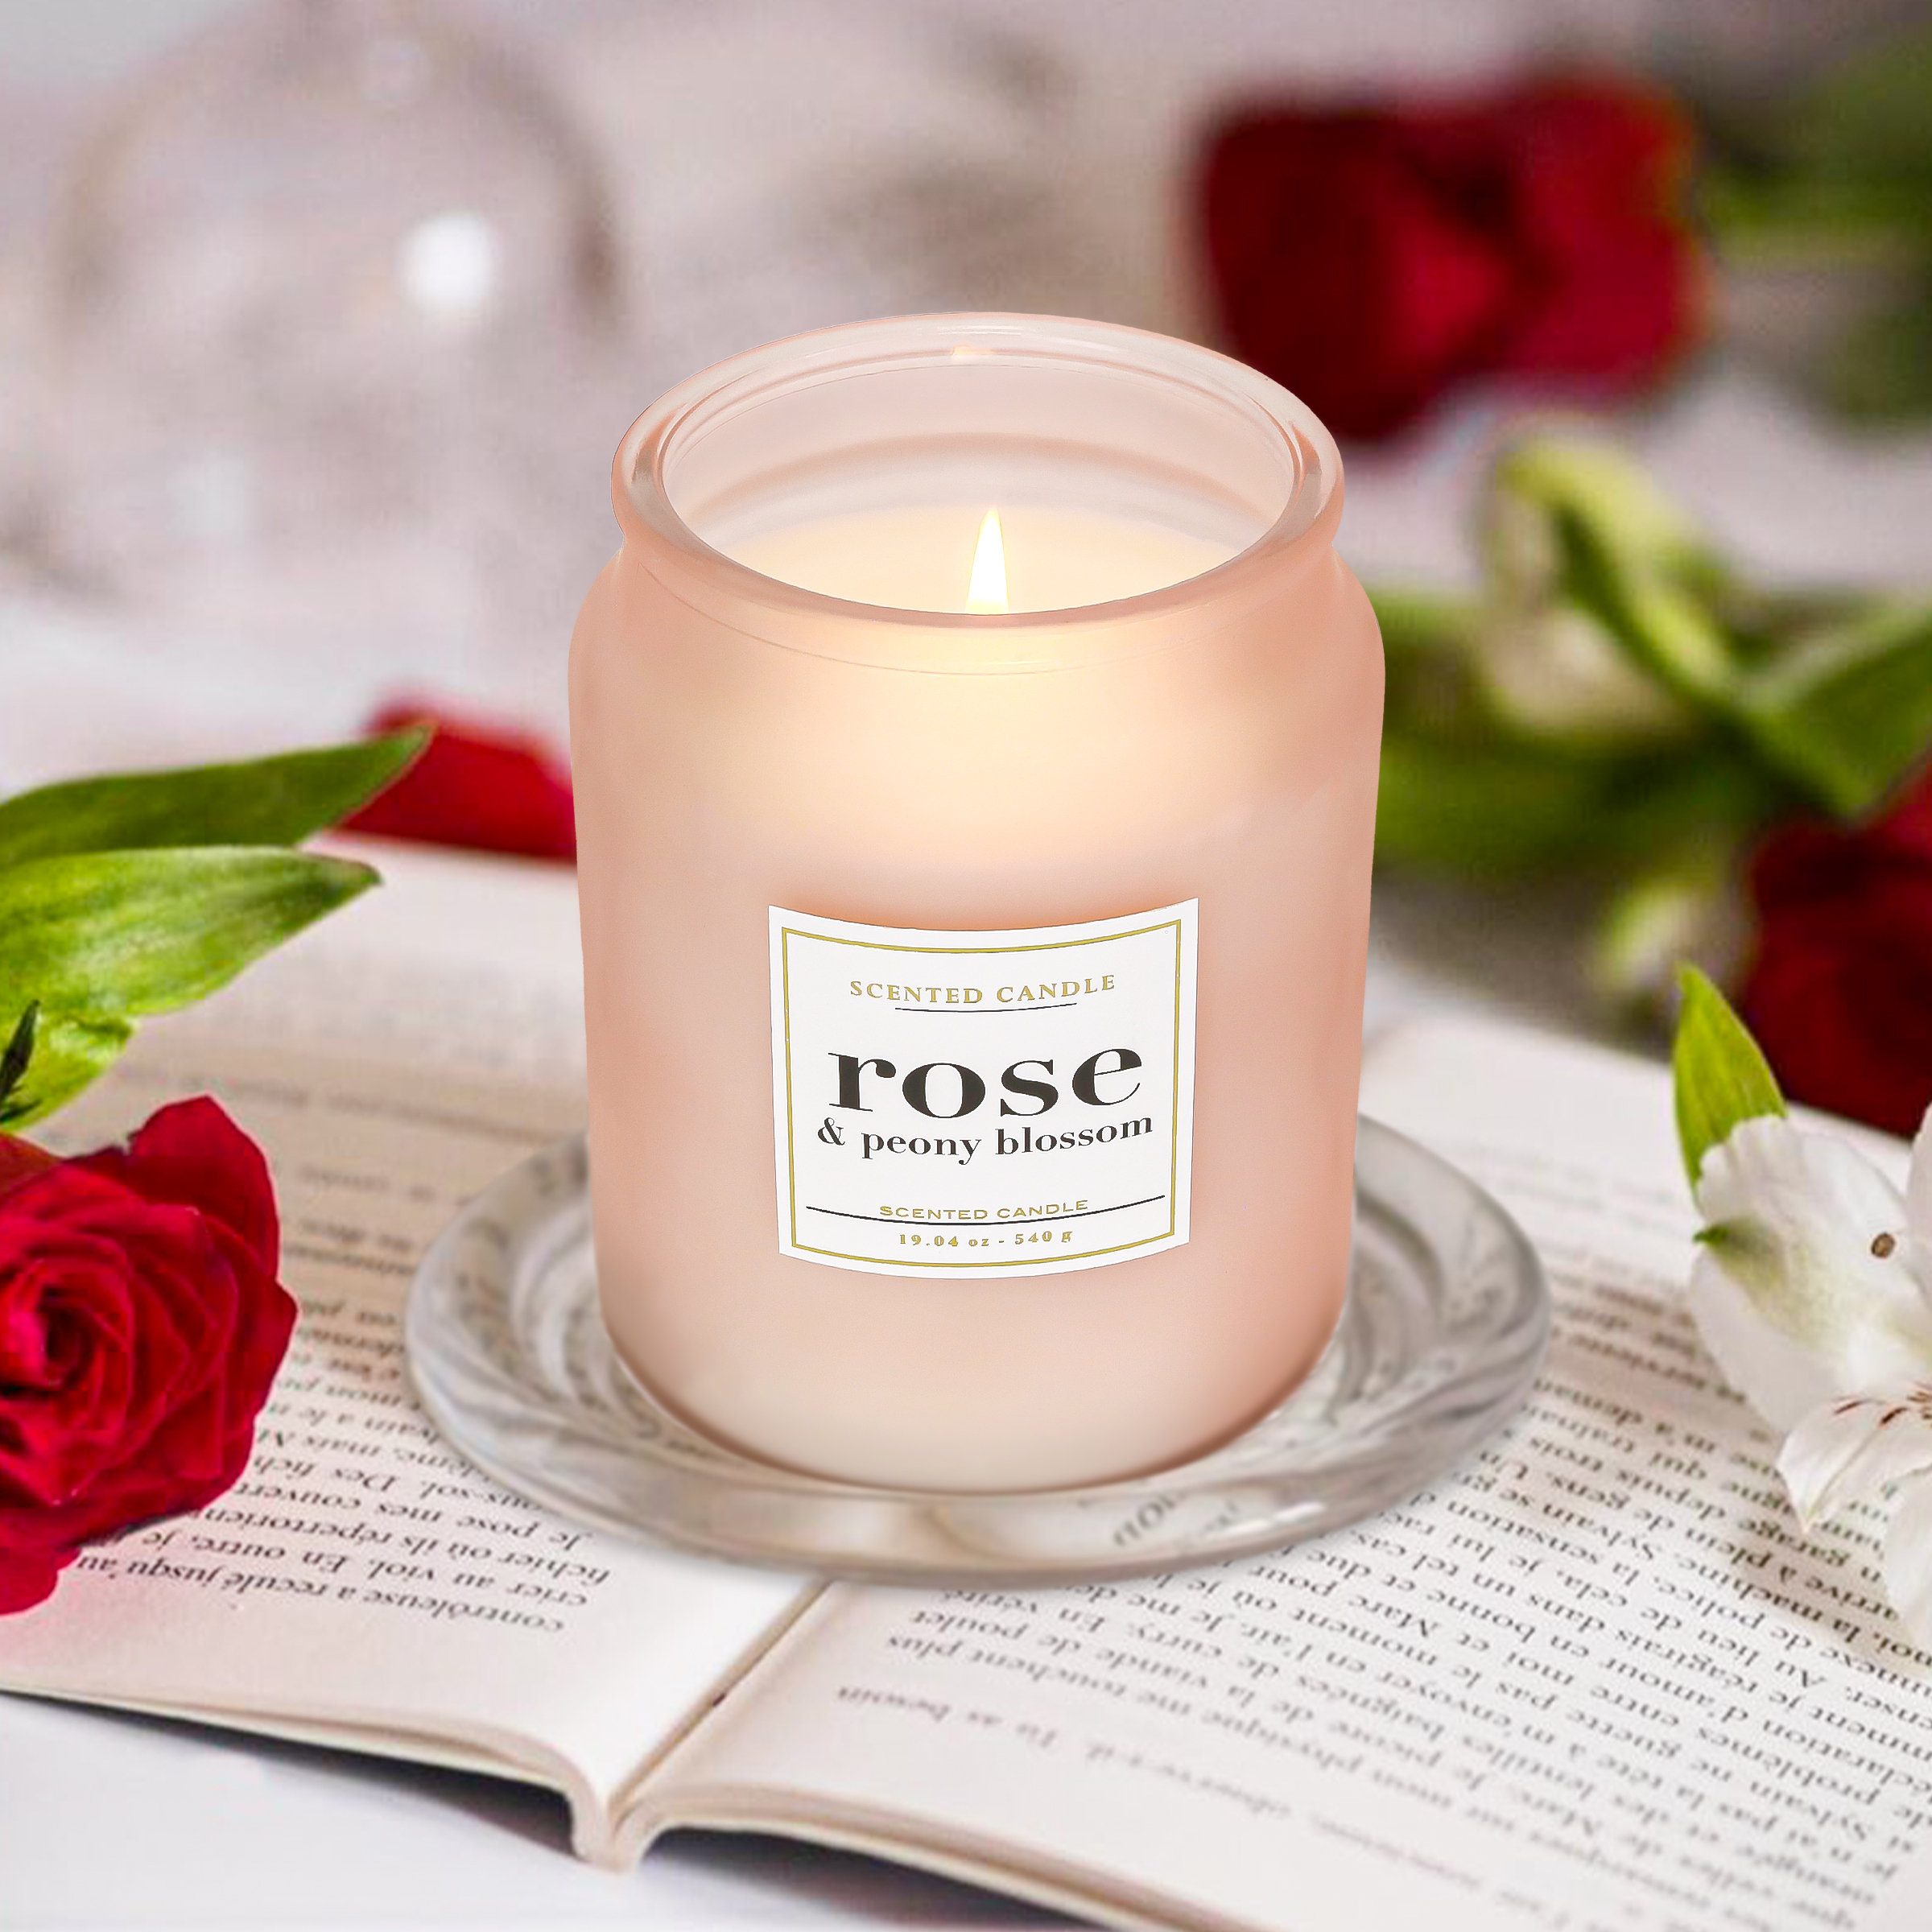 Symple Stuff Rose & Peony Blossom Scented Jar Candle